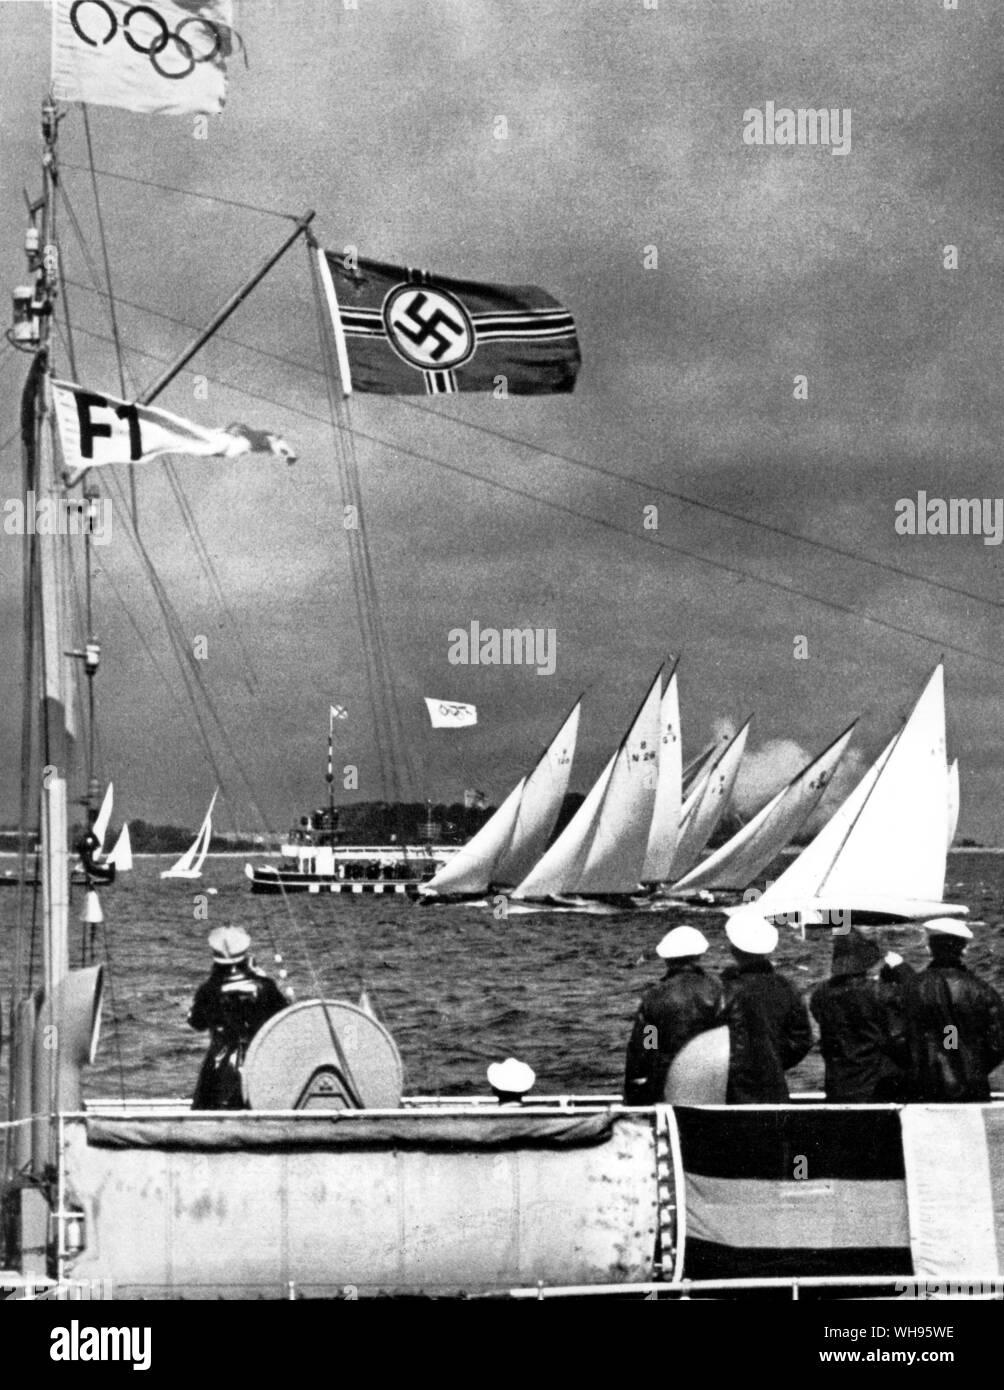 The start of the 8 metre class race on the second day of the Yachting at Kiel Olympic Games Berlin 1936 Stock Photo